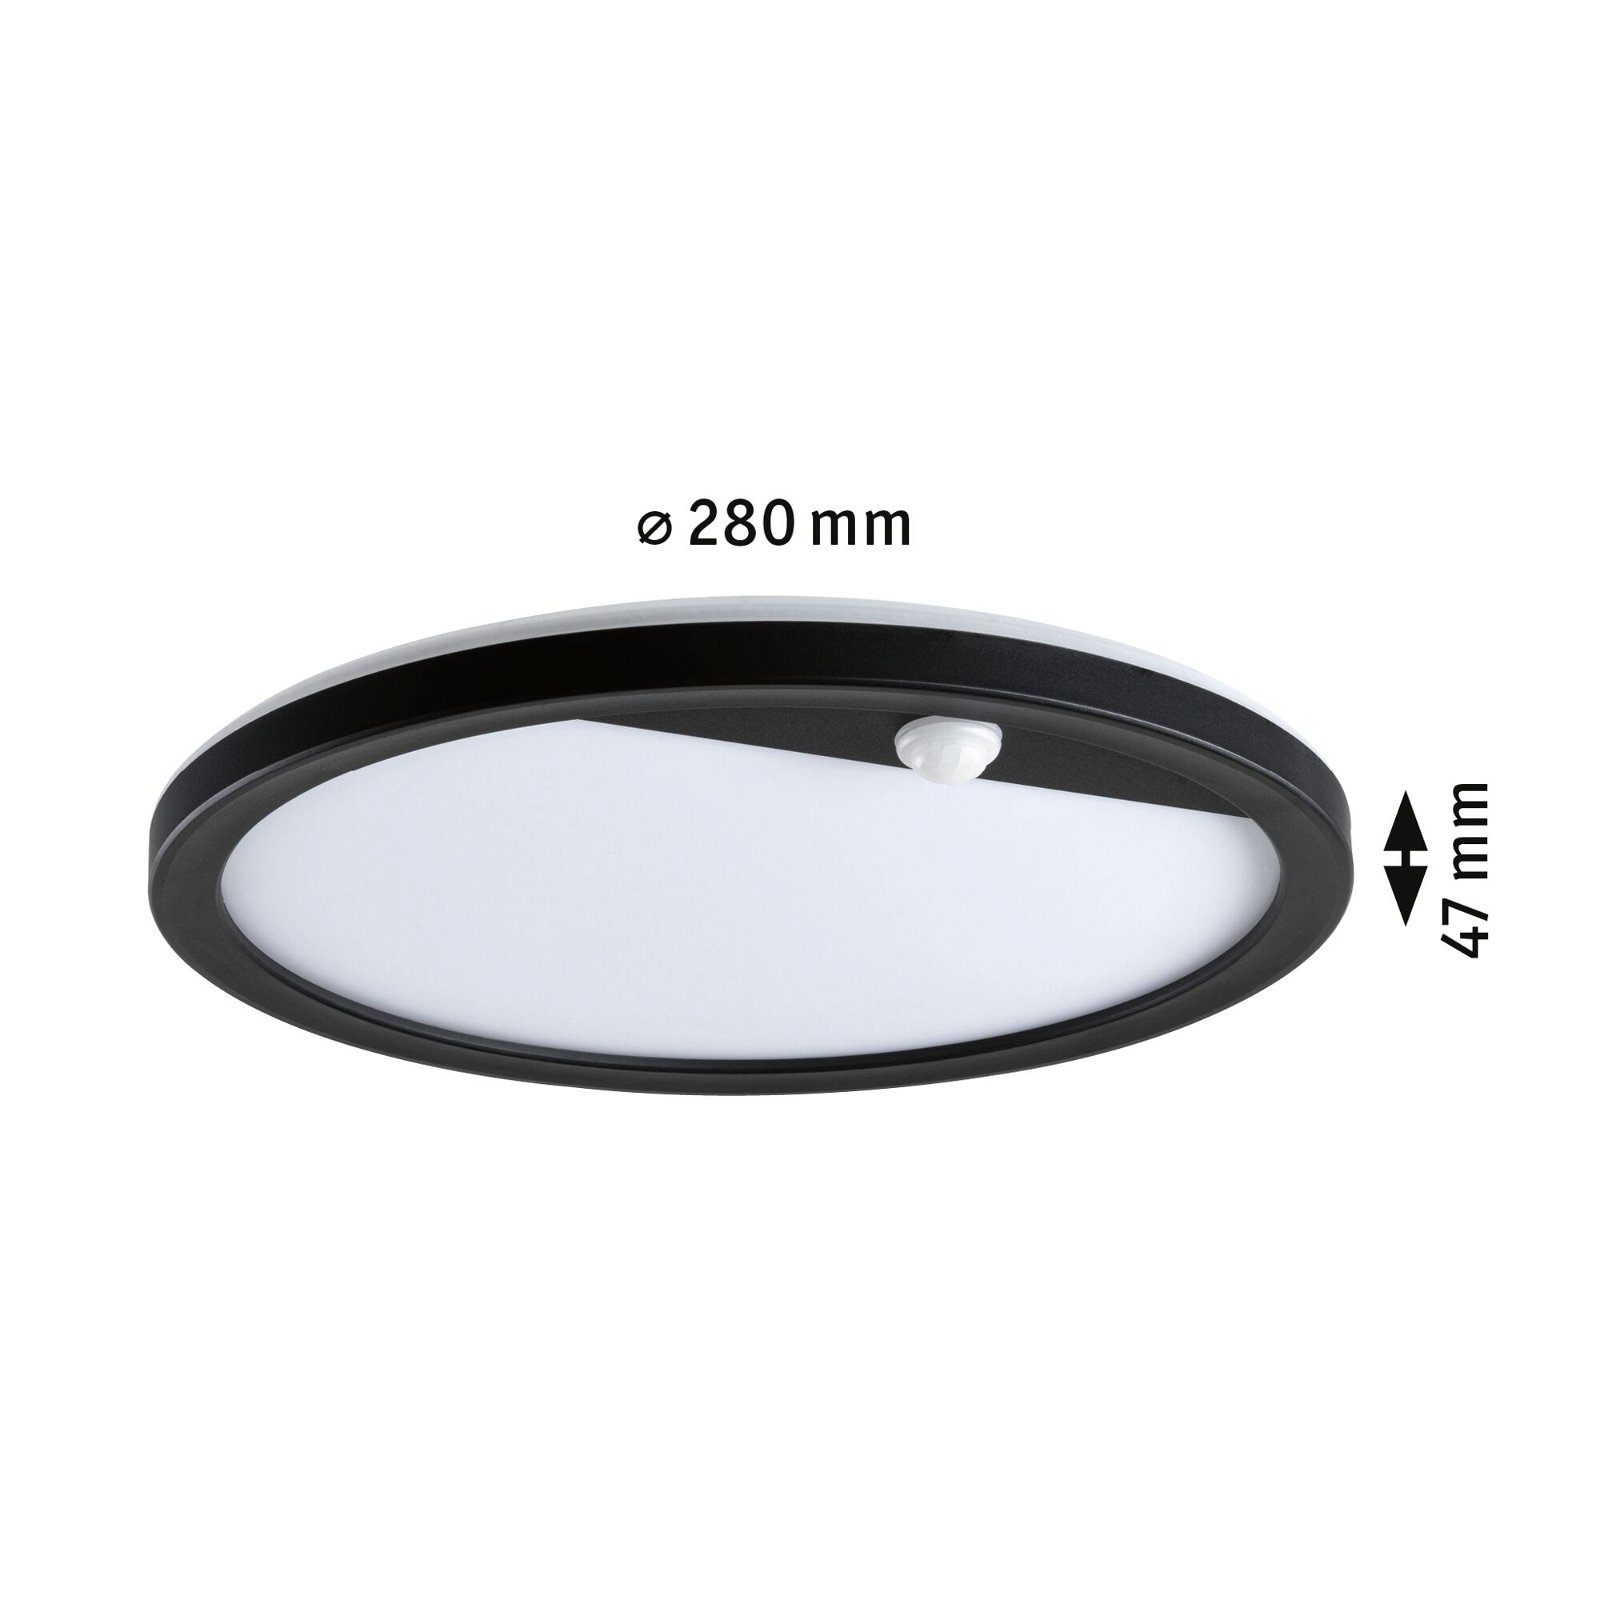 LED Exterior panel Lamina Backlight Motion detector insect friendly IP44 round 280mm Tunable Warm 14W 1150lm 230V Black Plastic